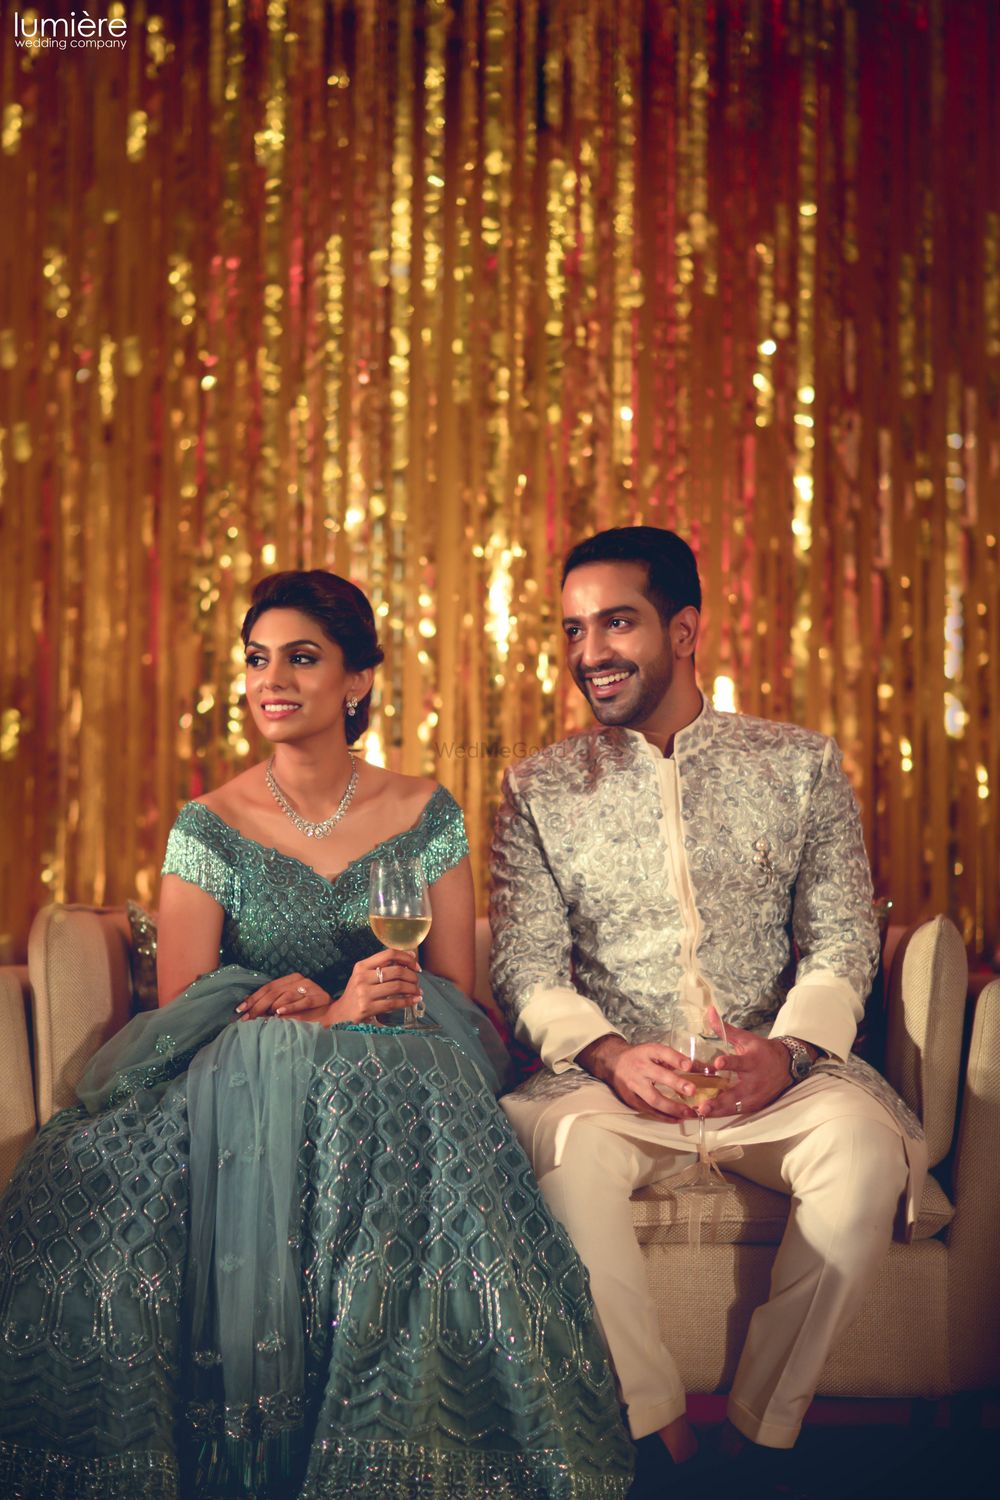 Photo of Bride and groom on engagement with gold string backdrop